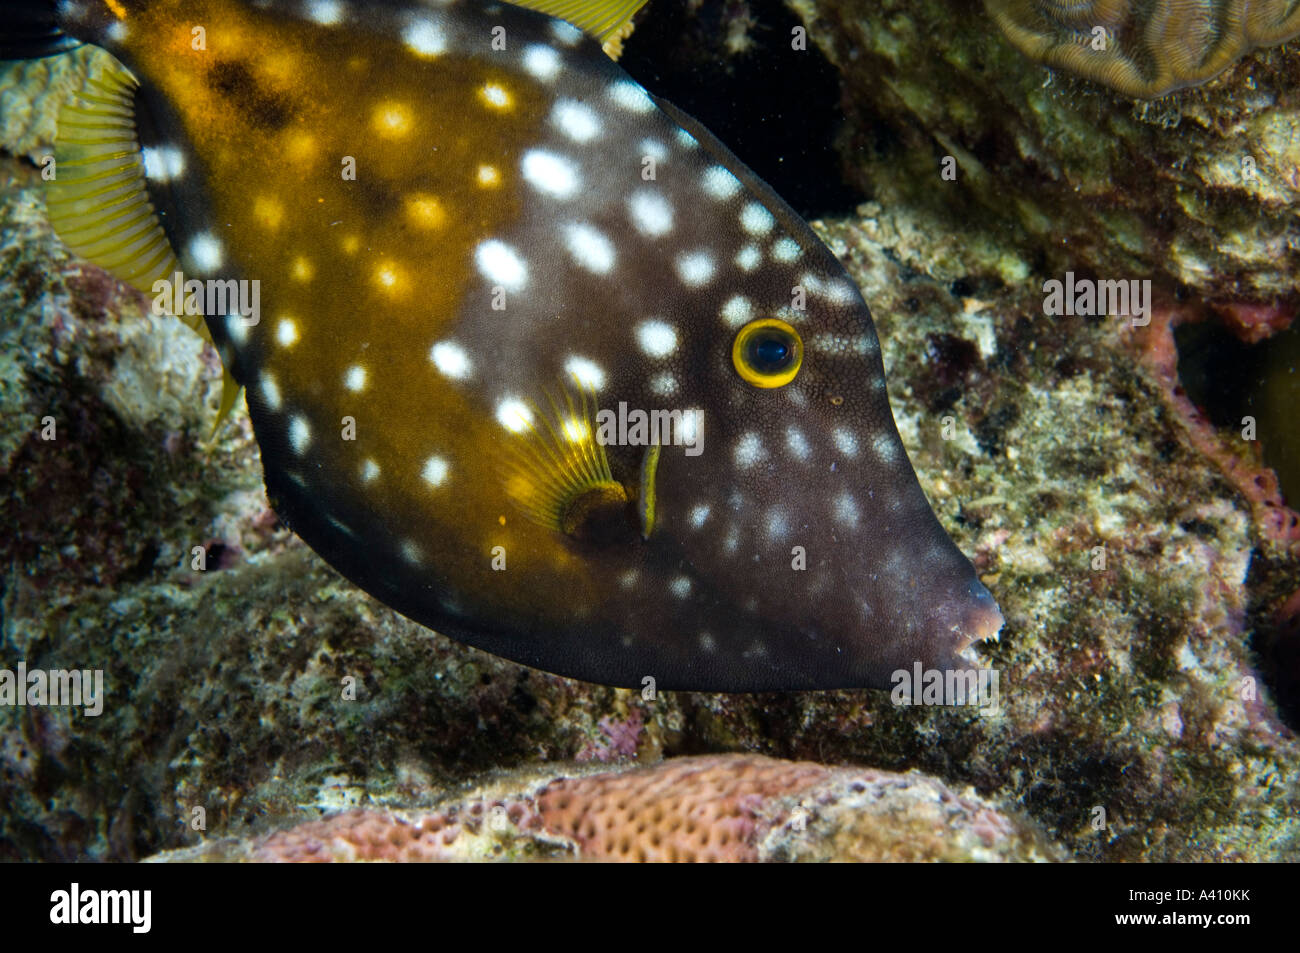 Whitespotted filefish on coral reef at Bonaire Island in the Caribbean Stock Photo